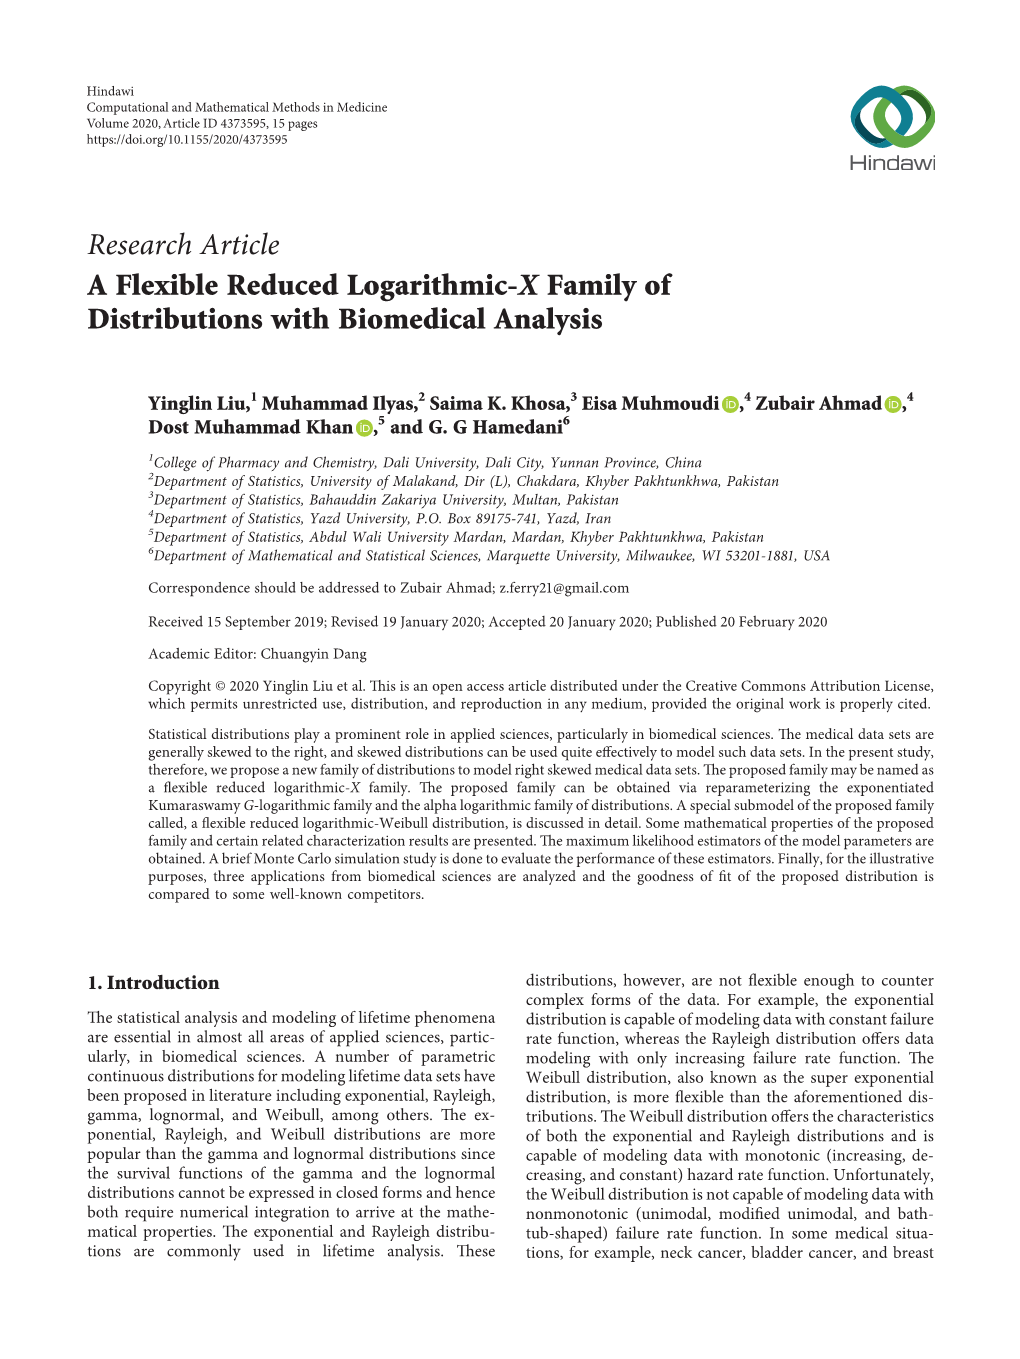 A Flexible Reduced Logarithmic-X Family of Distributions with Biomedical Analysis